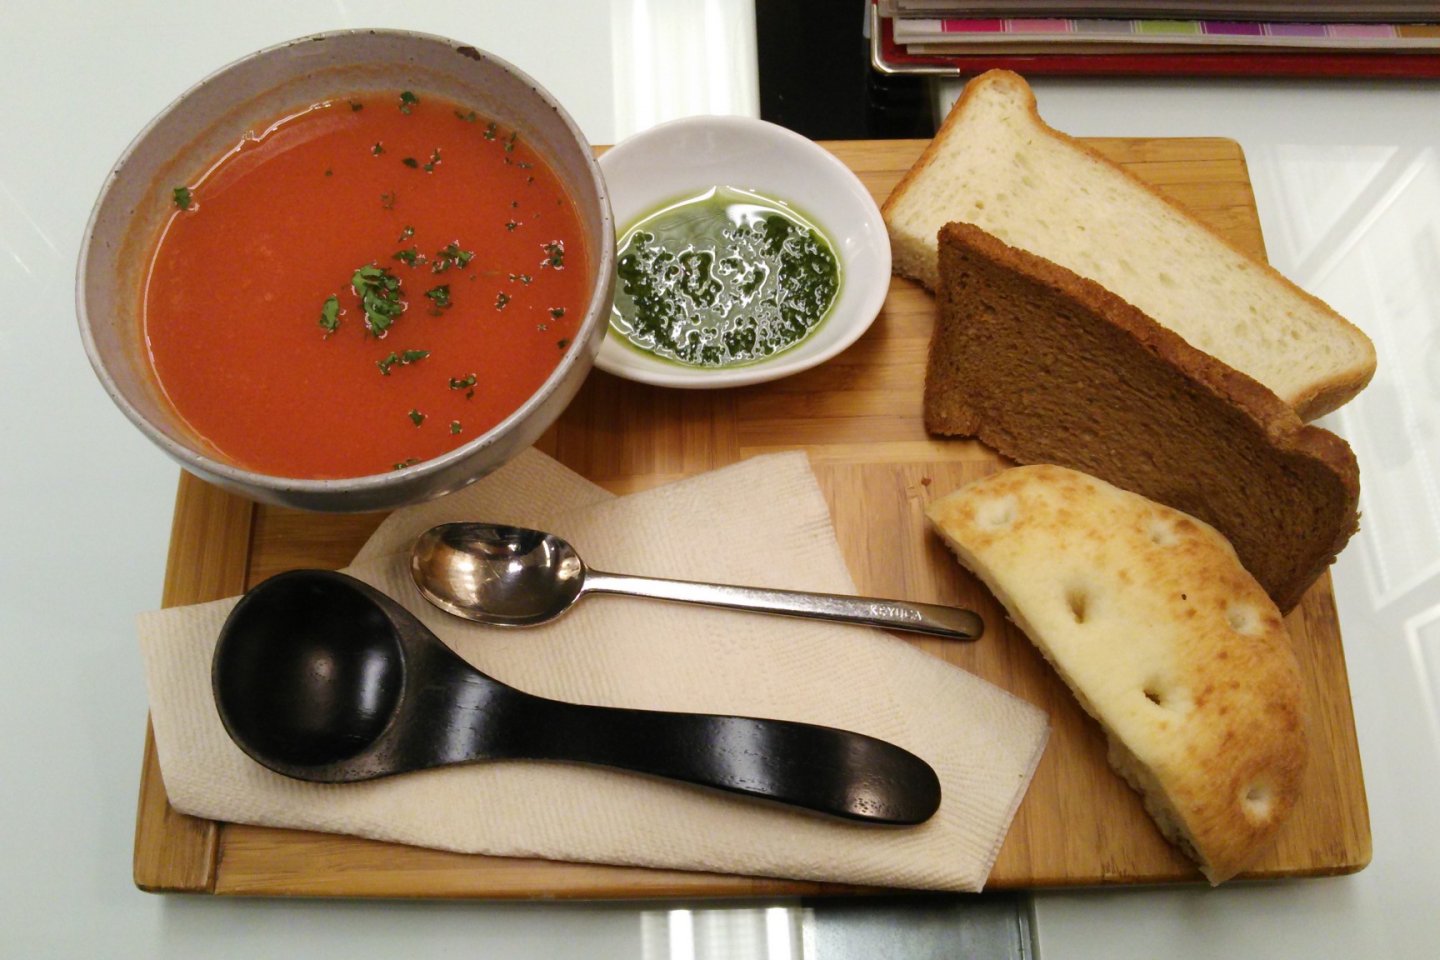 The soup is made from organic vegetables; the range of flavors depends on what's available. It comes with bread and a basil sauce that's a lot like pesto.